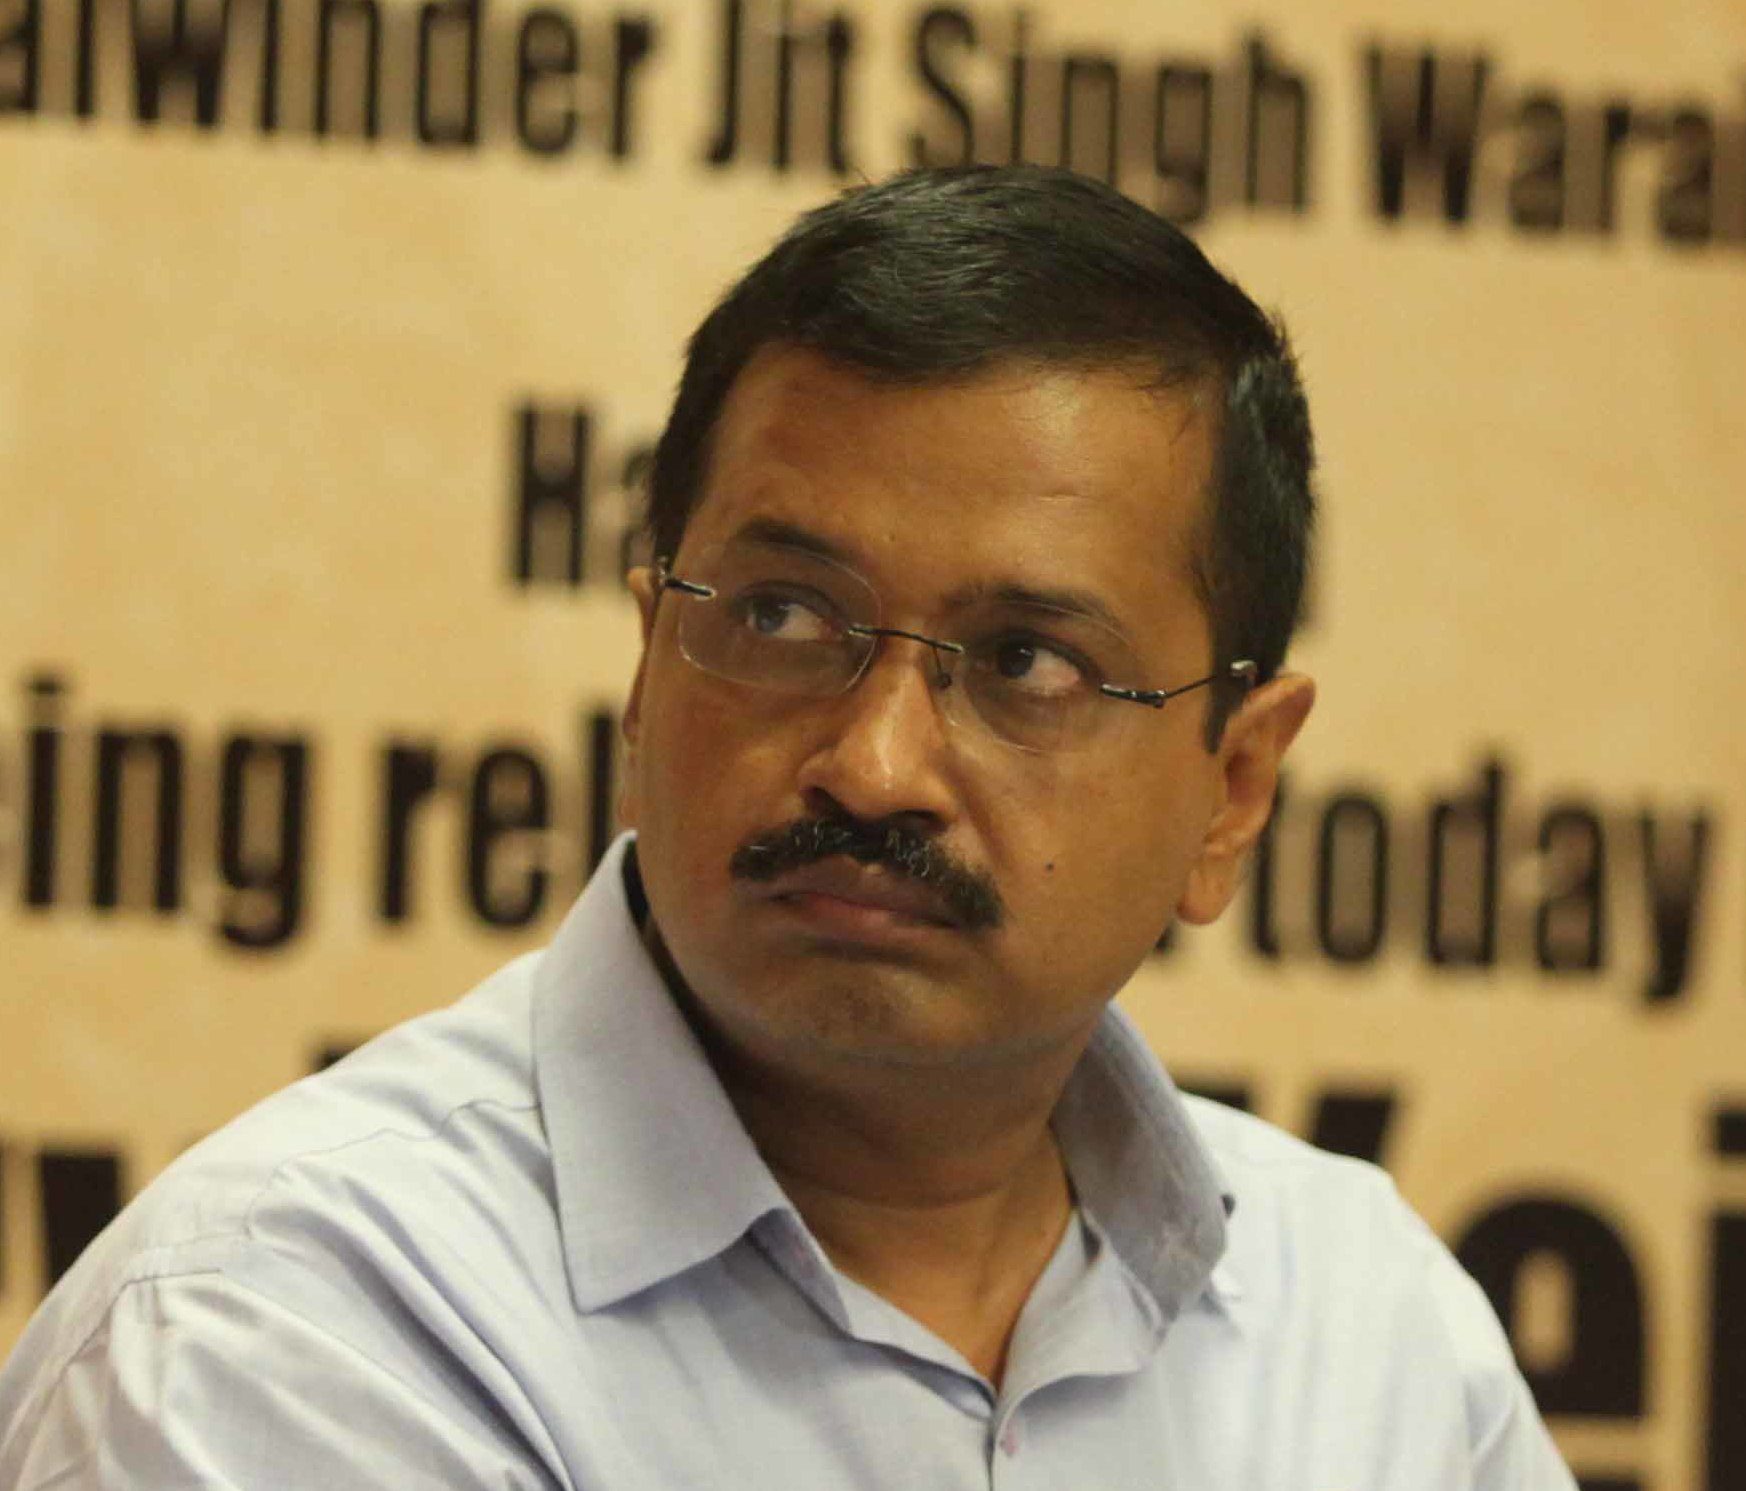 Kejriwal eating sweets, mangoes despite diabetes to make grounds for bail: ED to court